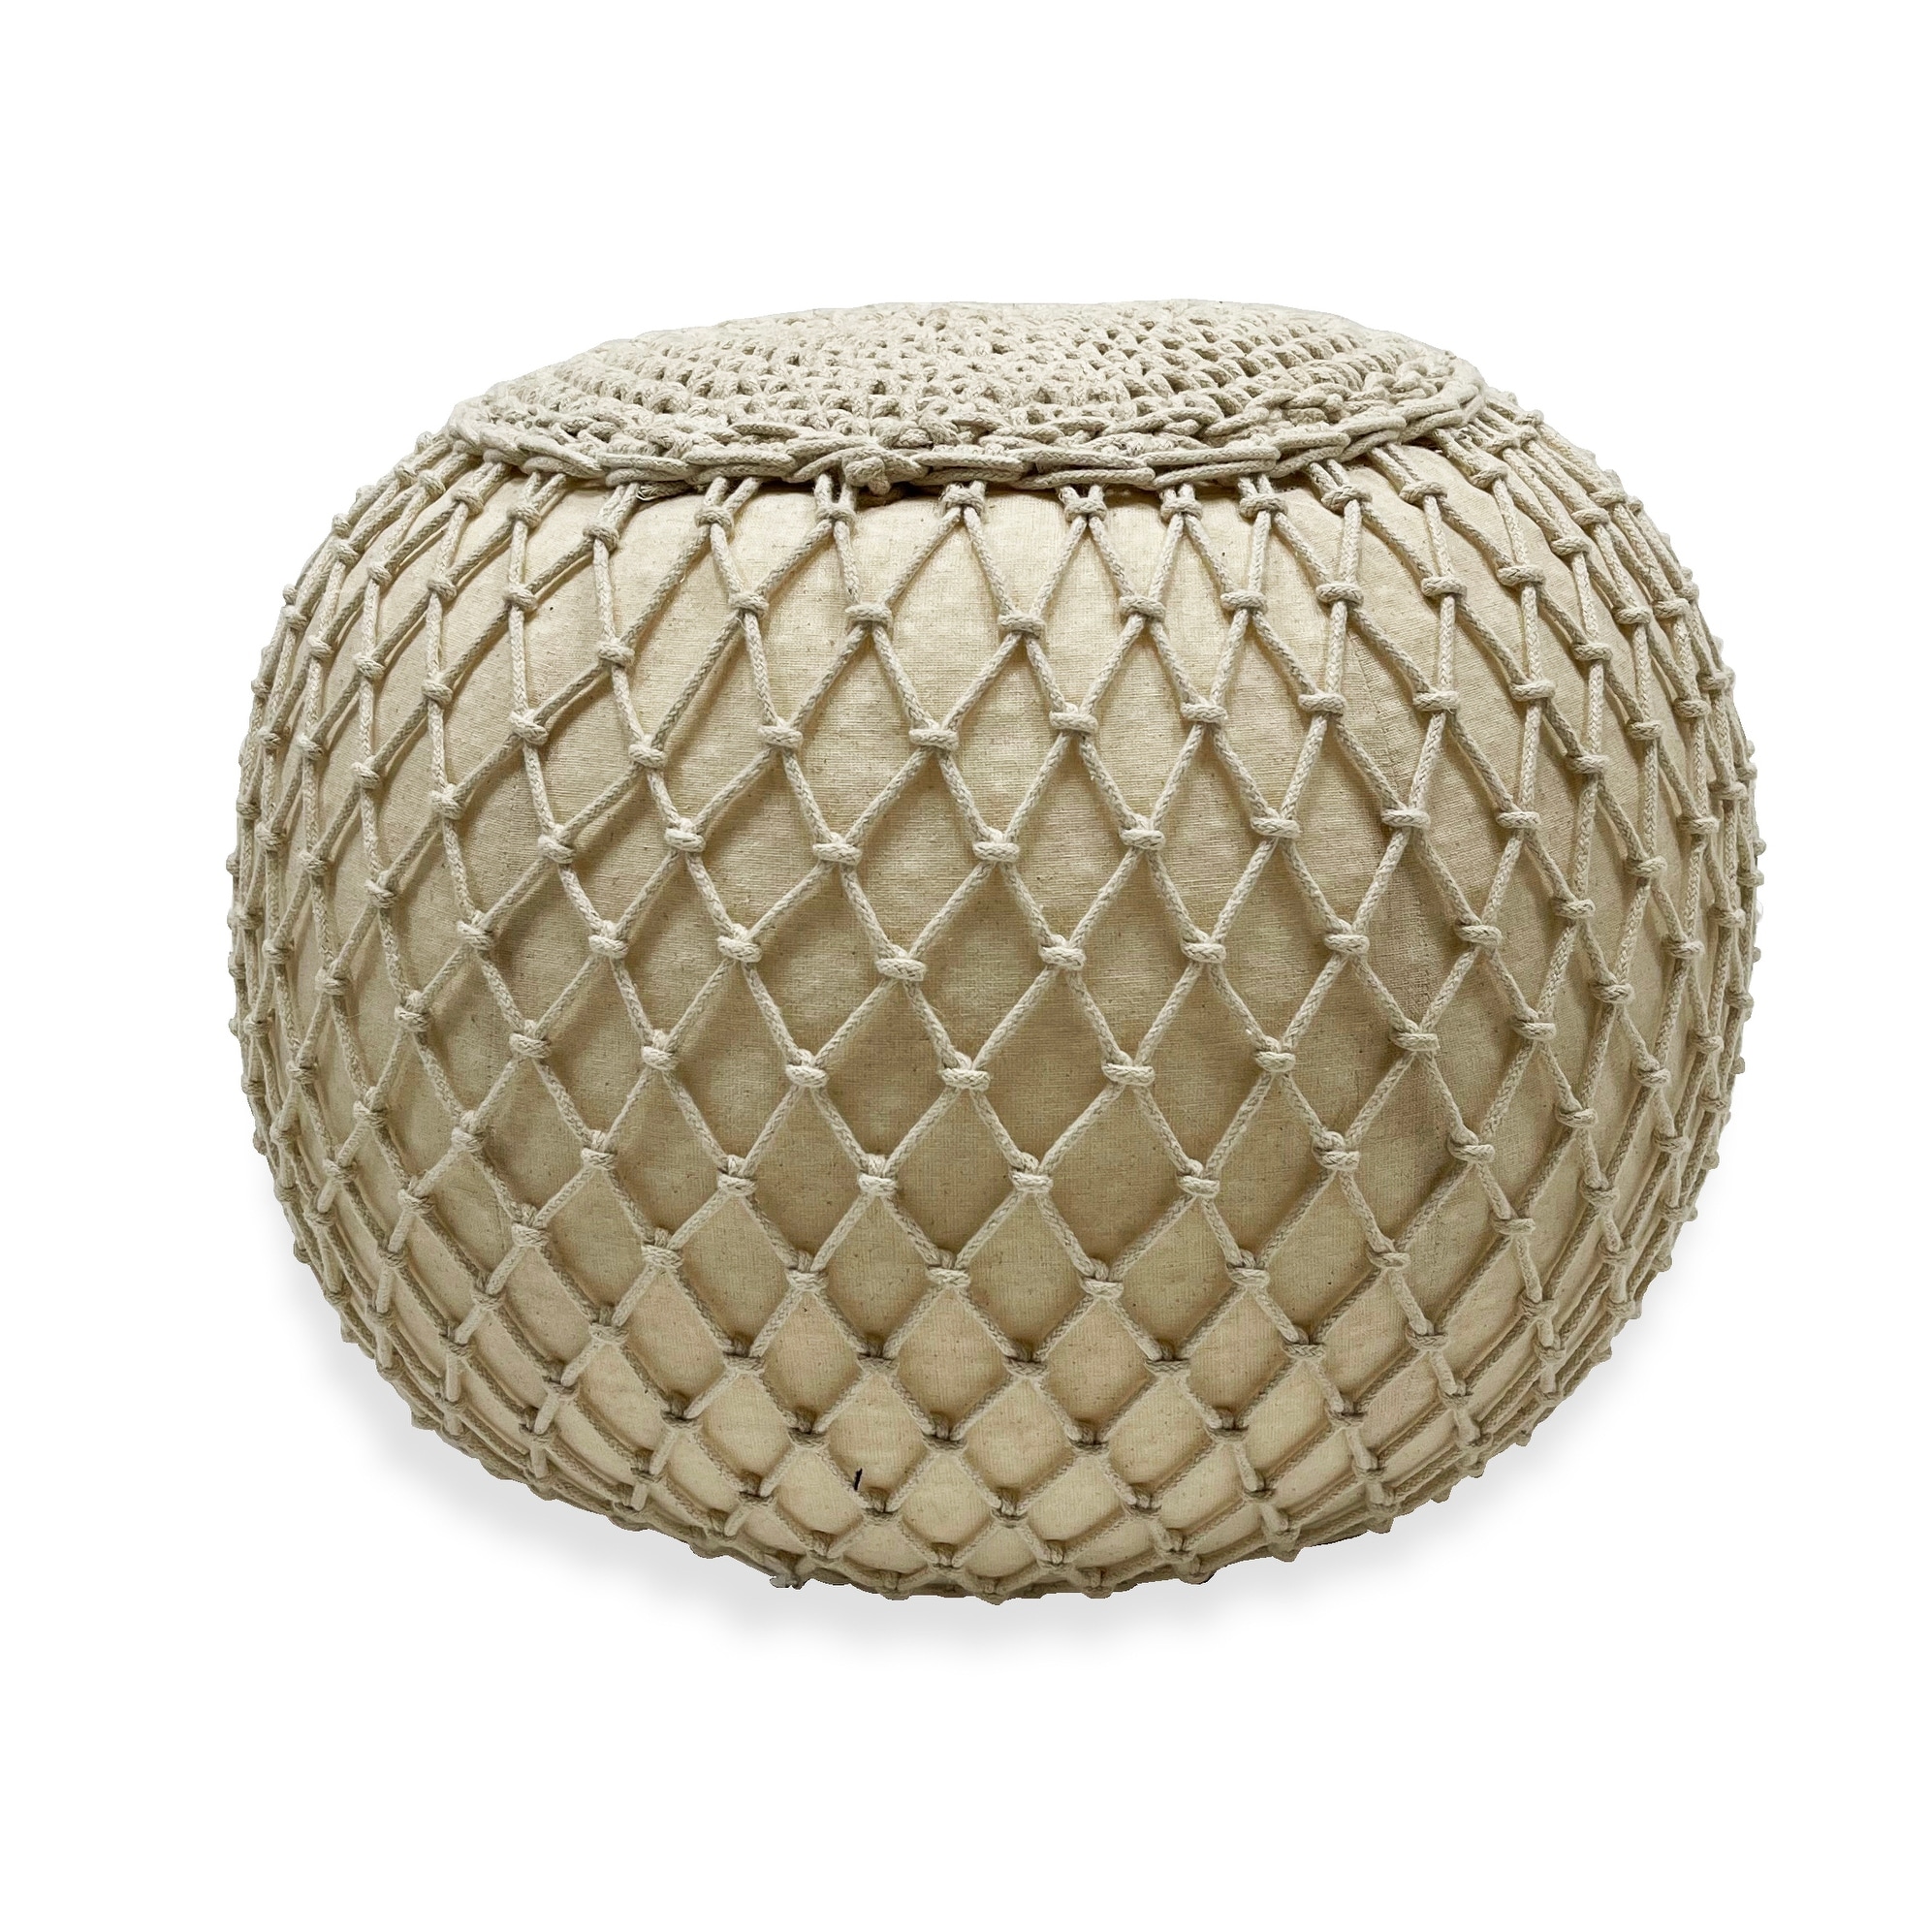 Loominaire Rustic Macrame Pouf / Footstool "Evie" Hand Woven